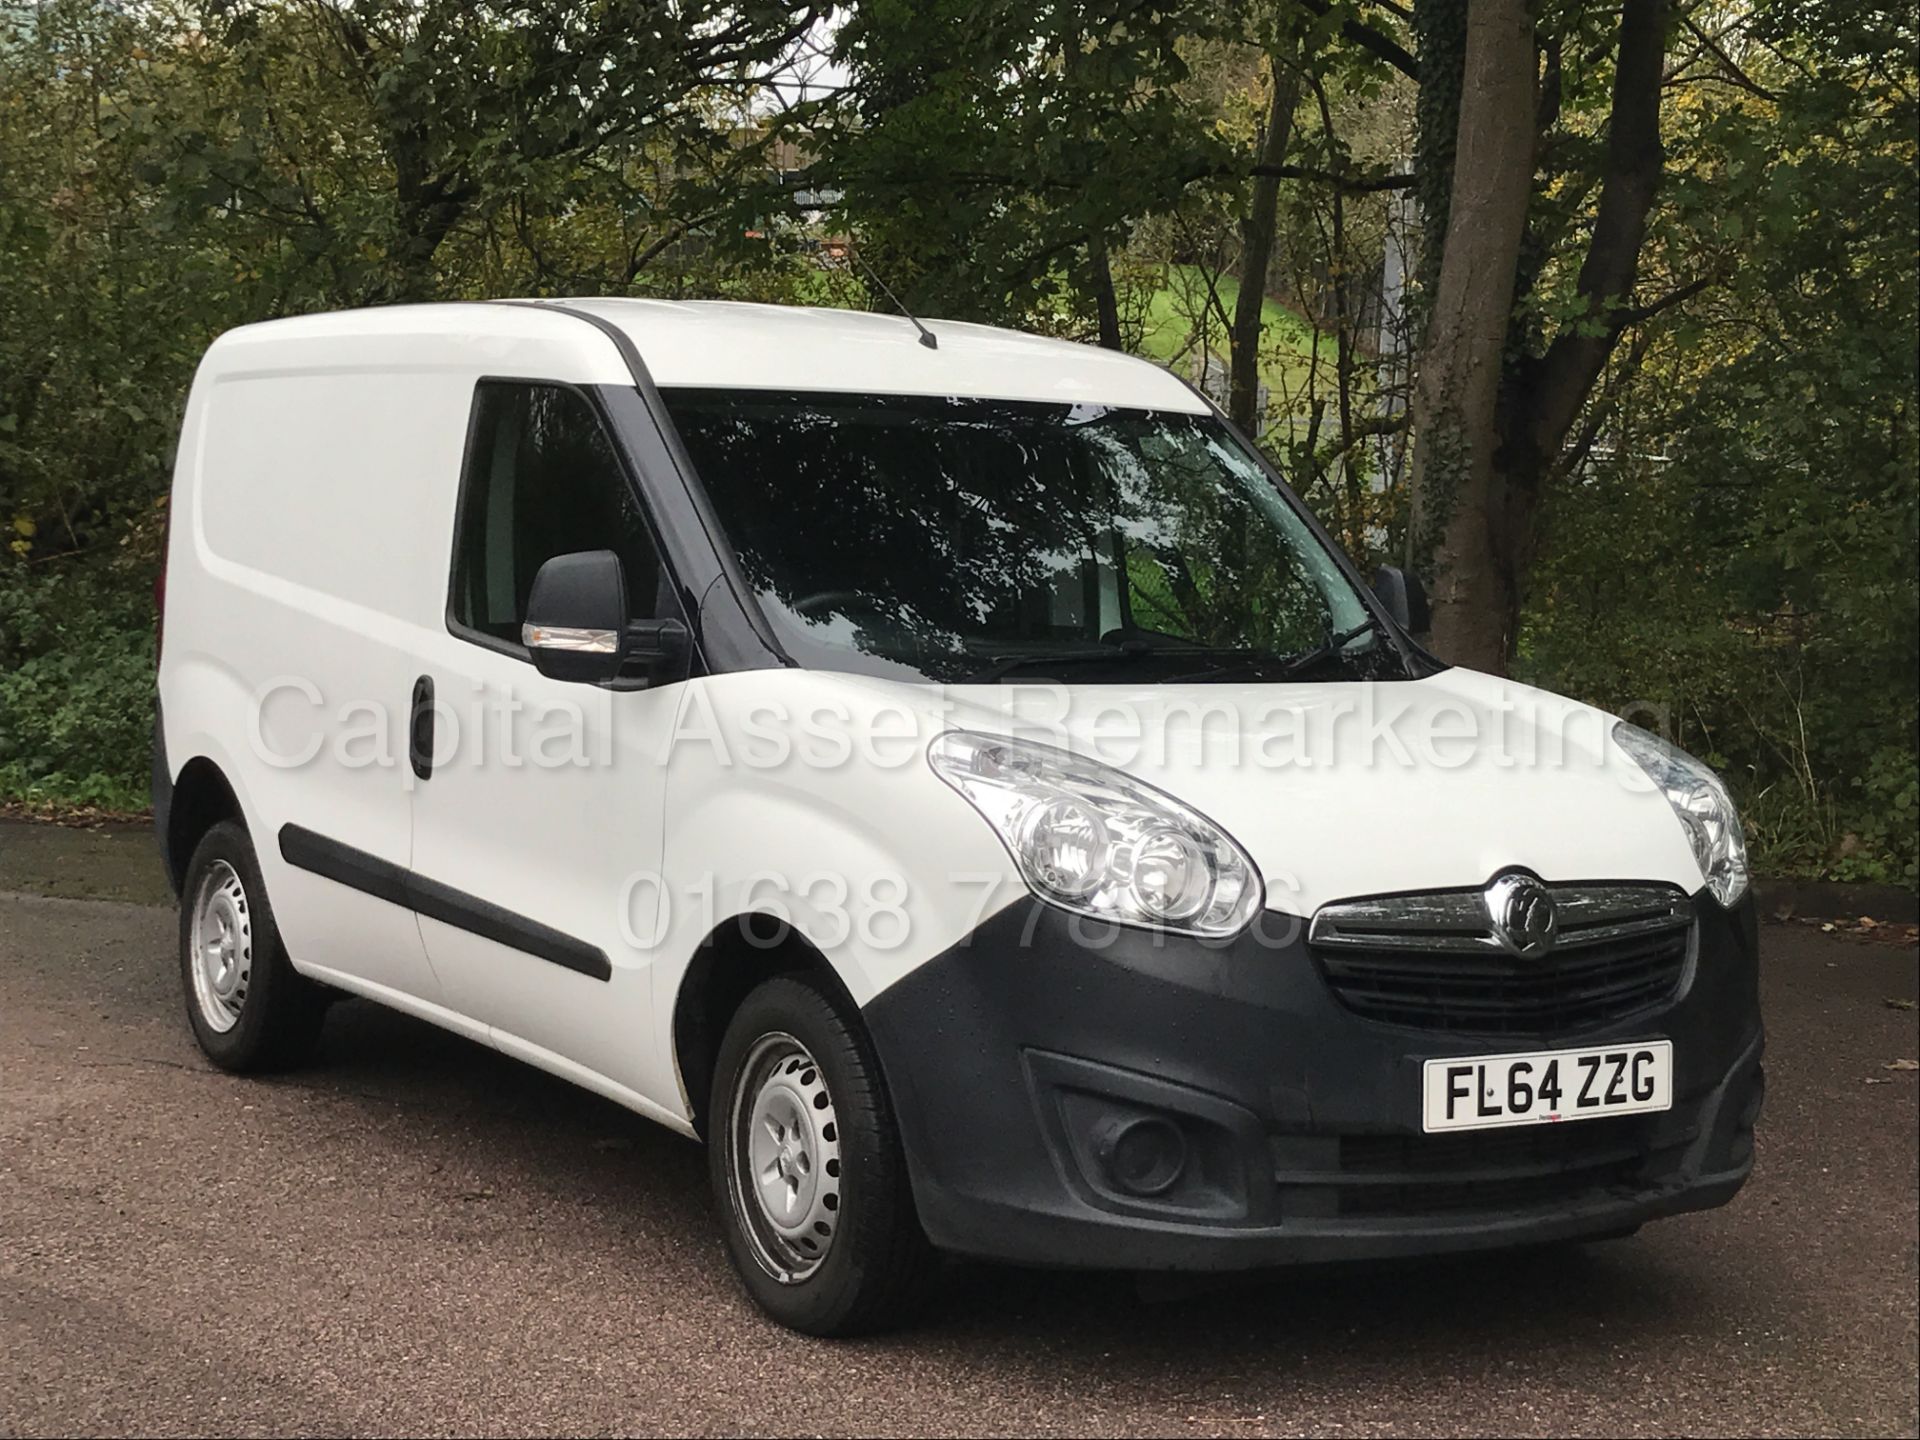 VAUXHALL COMBO 2000 L1H1 (2015 MODEL) 'CDTI - 90 BHP' (1 FORMER COMPANY OWNER FROM NEW) *50 MPG+*